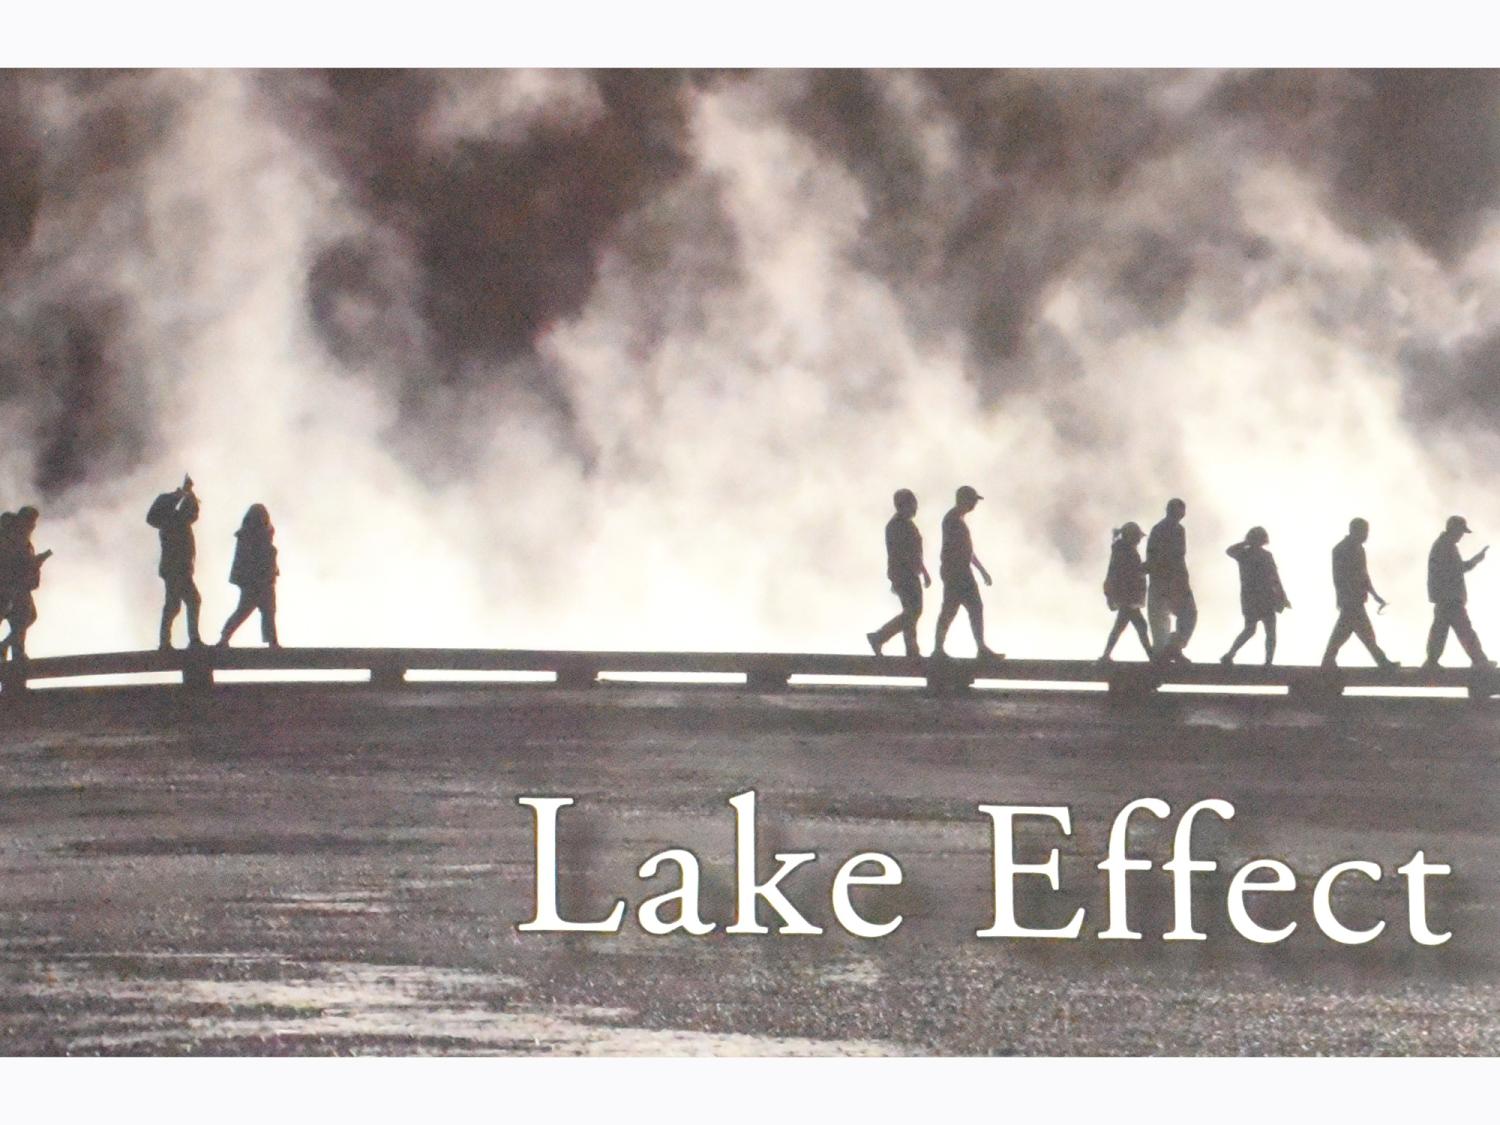 An illustration of people walking in silhouette. The image contains the words "Lake Effect," the name of Penn State Behrend's international literary journal.